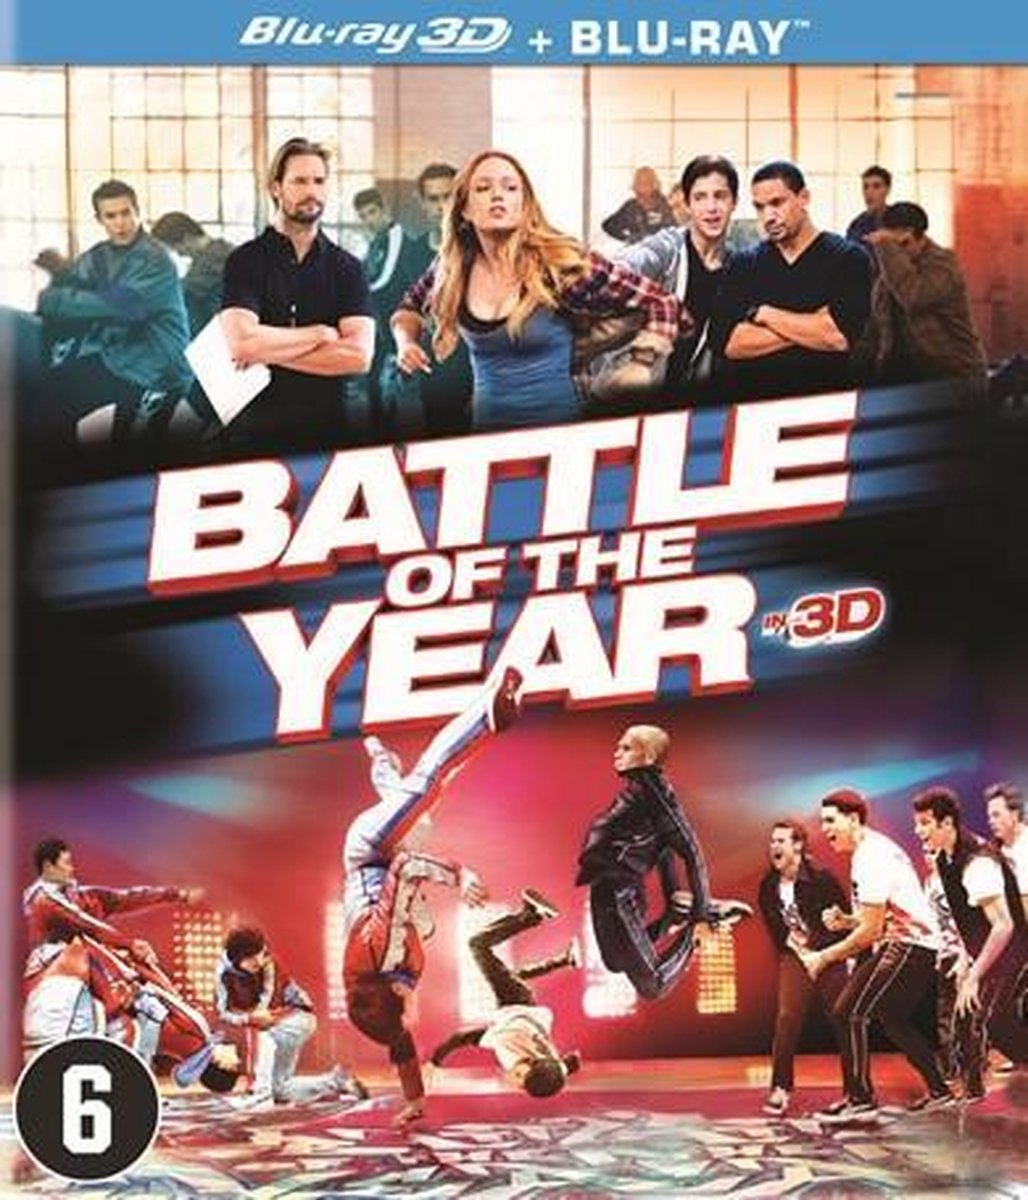 BATTLE OF THE YEAR 3D